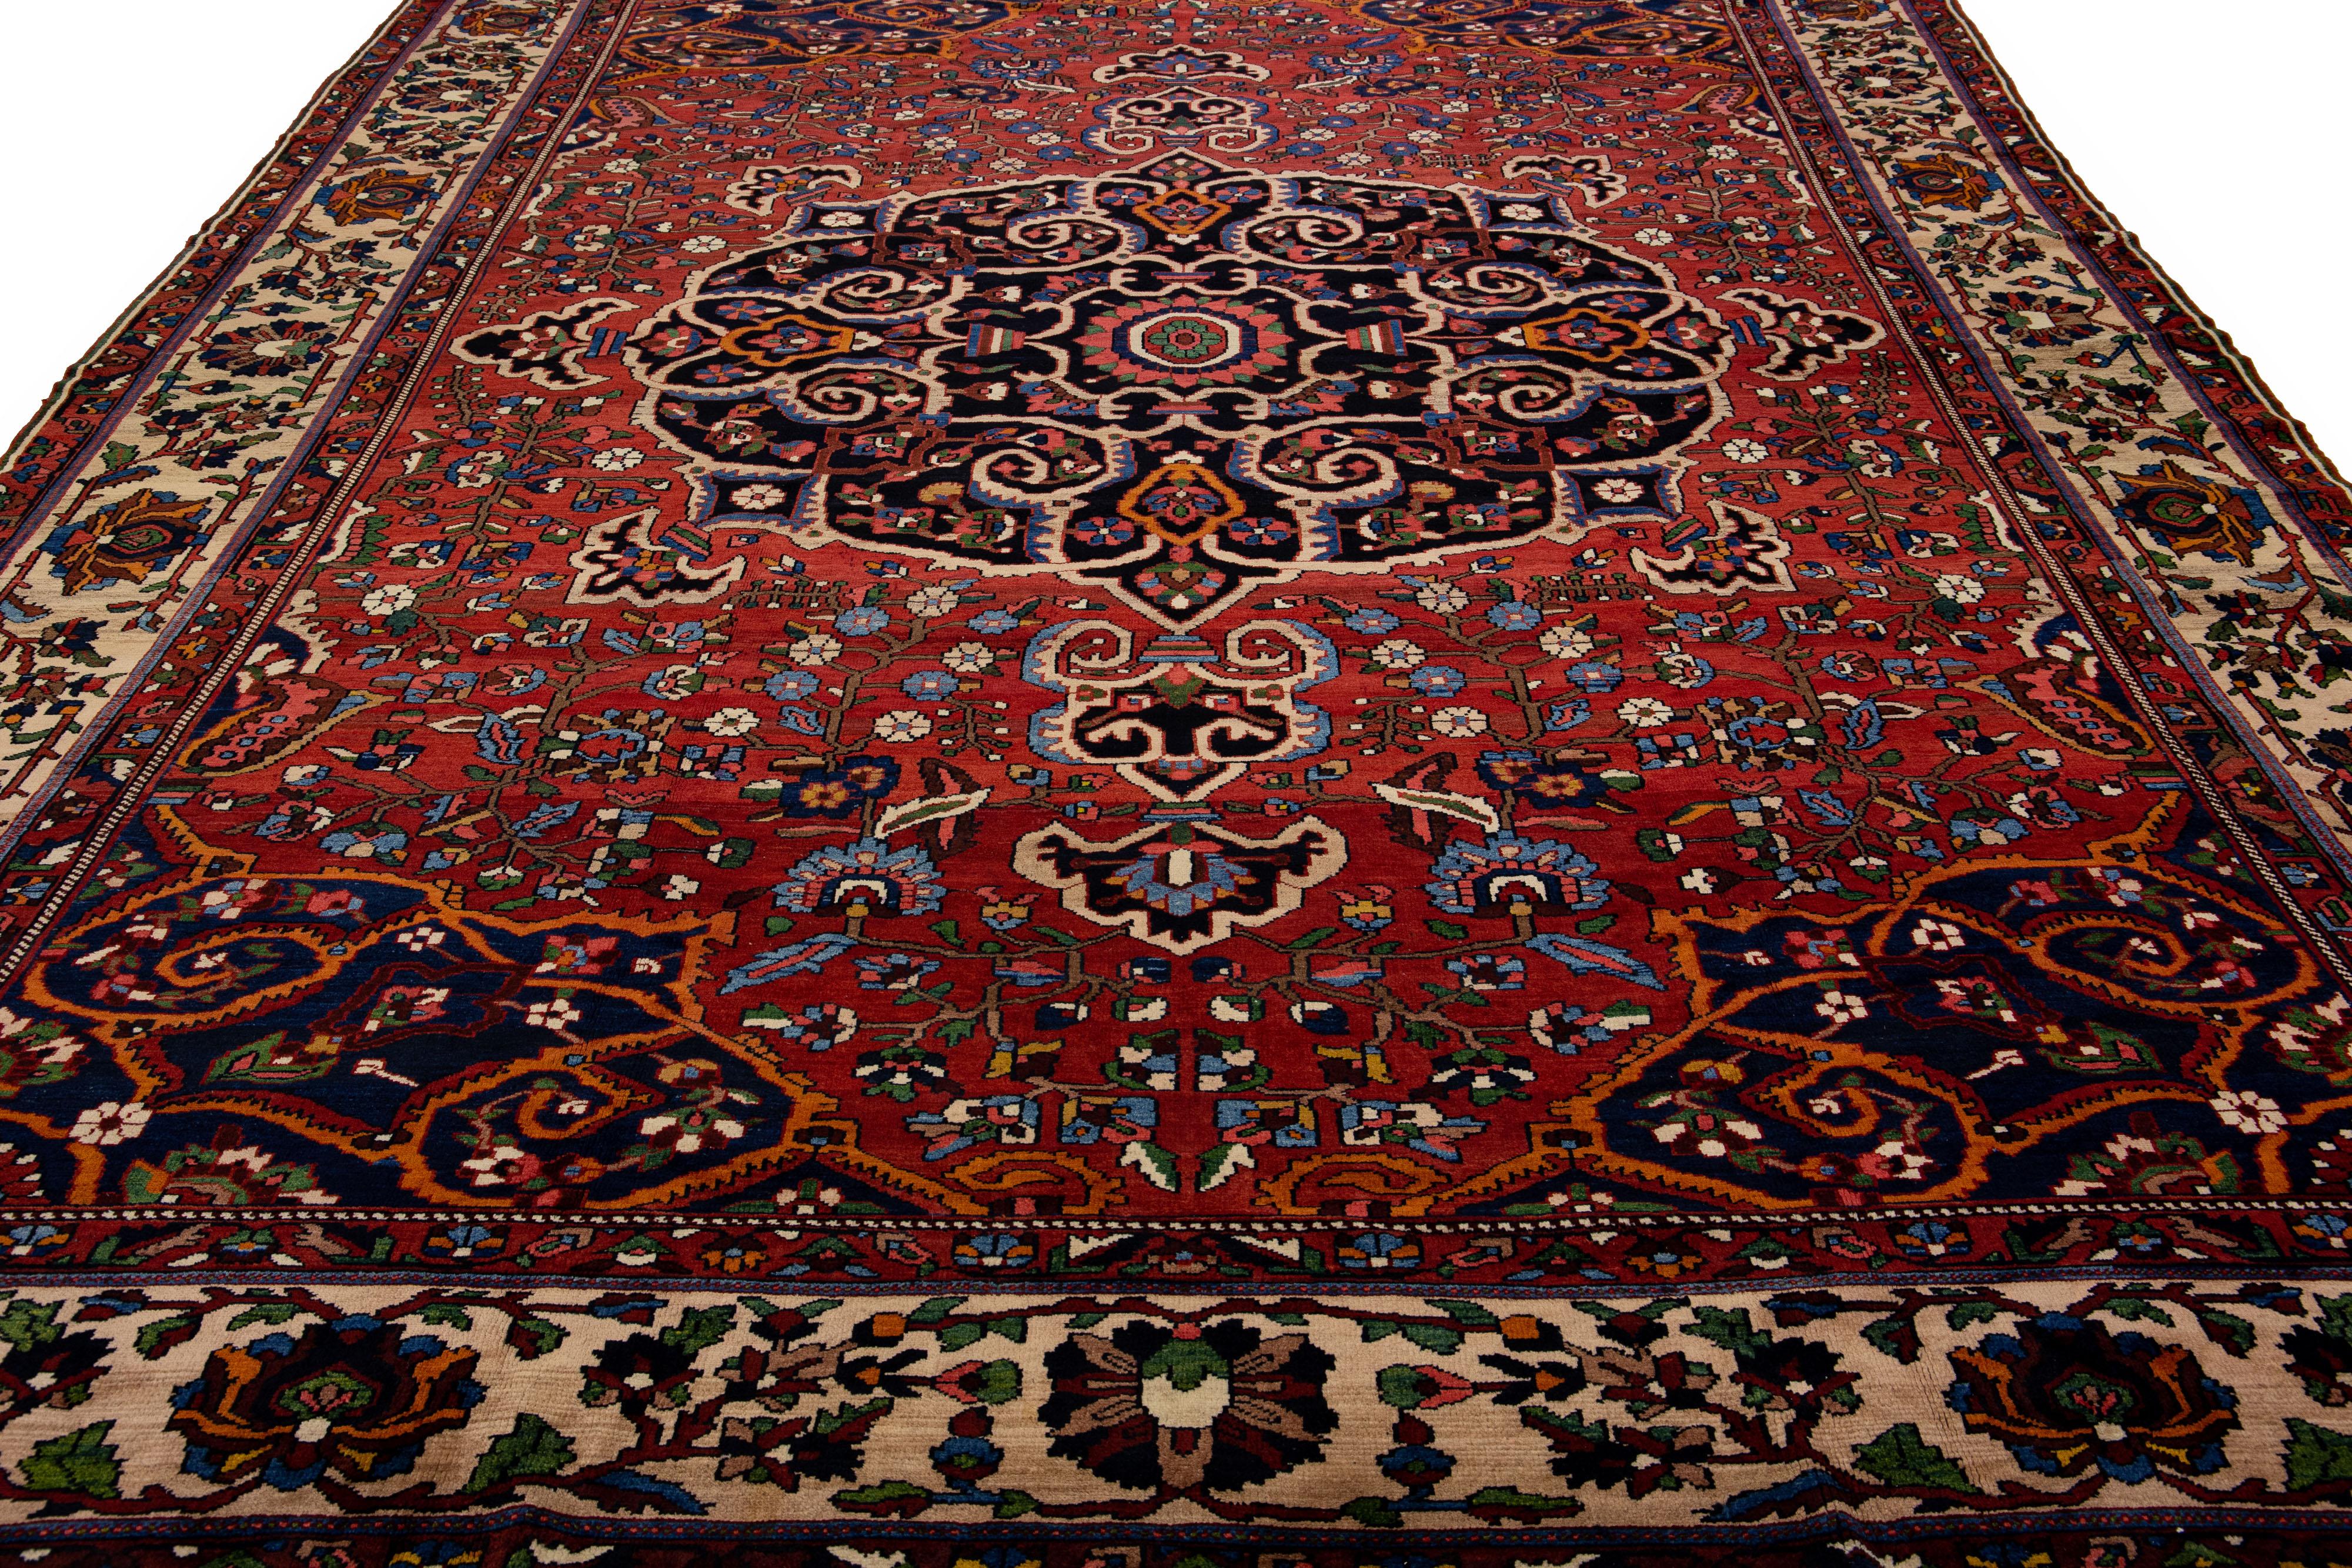 Beautiful Antique Bakhtiari hand-knotted wool rug with a red field. This Persian piece has an all-over multicolor accent in a gorgeous classic Medallion motif.

This rug measures 11'4